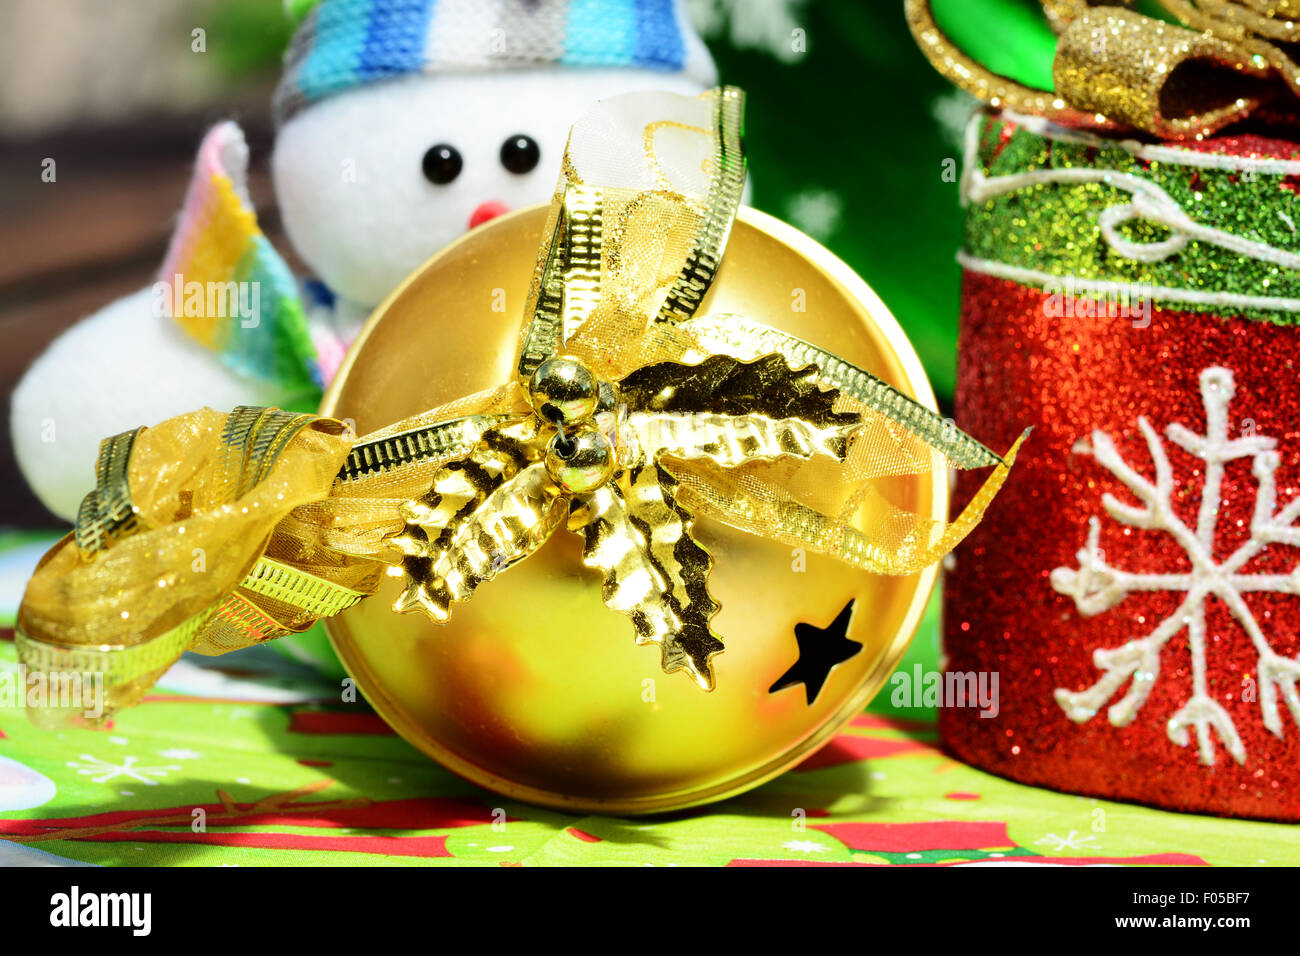 Macro shot of a golden christmas ball and other decorations Stock Photo